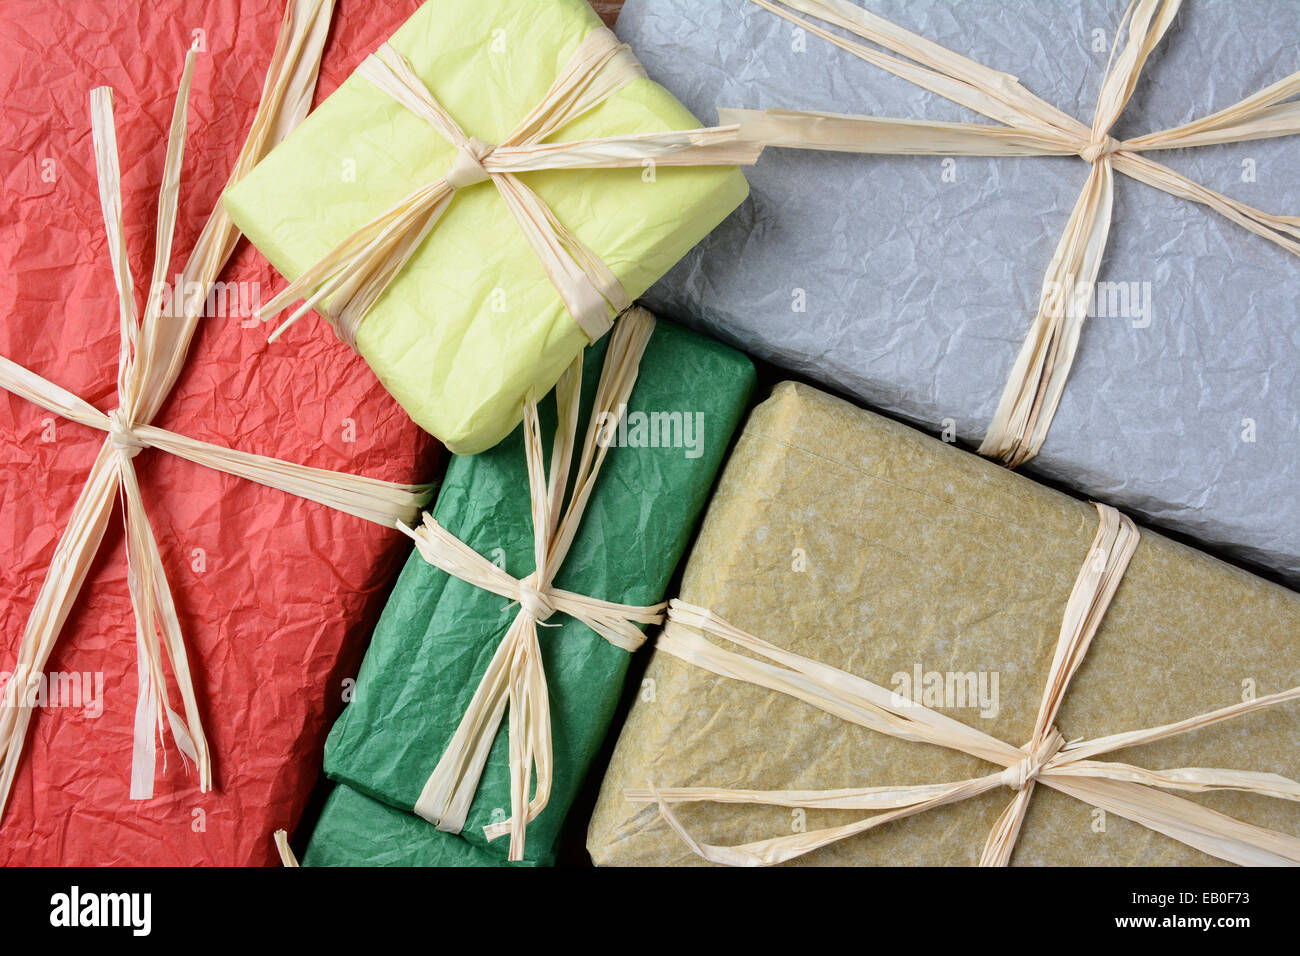 High angle closeup shot of a group of Christmas presents wrapped with colorful tissue paper. The gifts are tied with raffia. Stock Photo